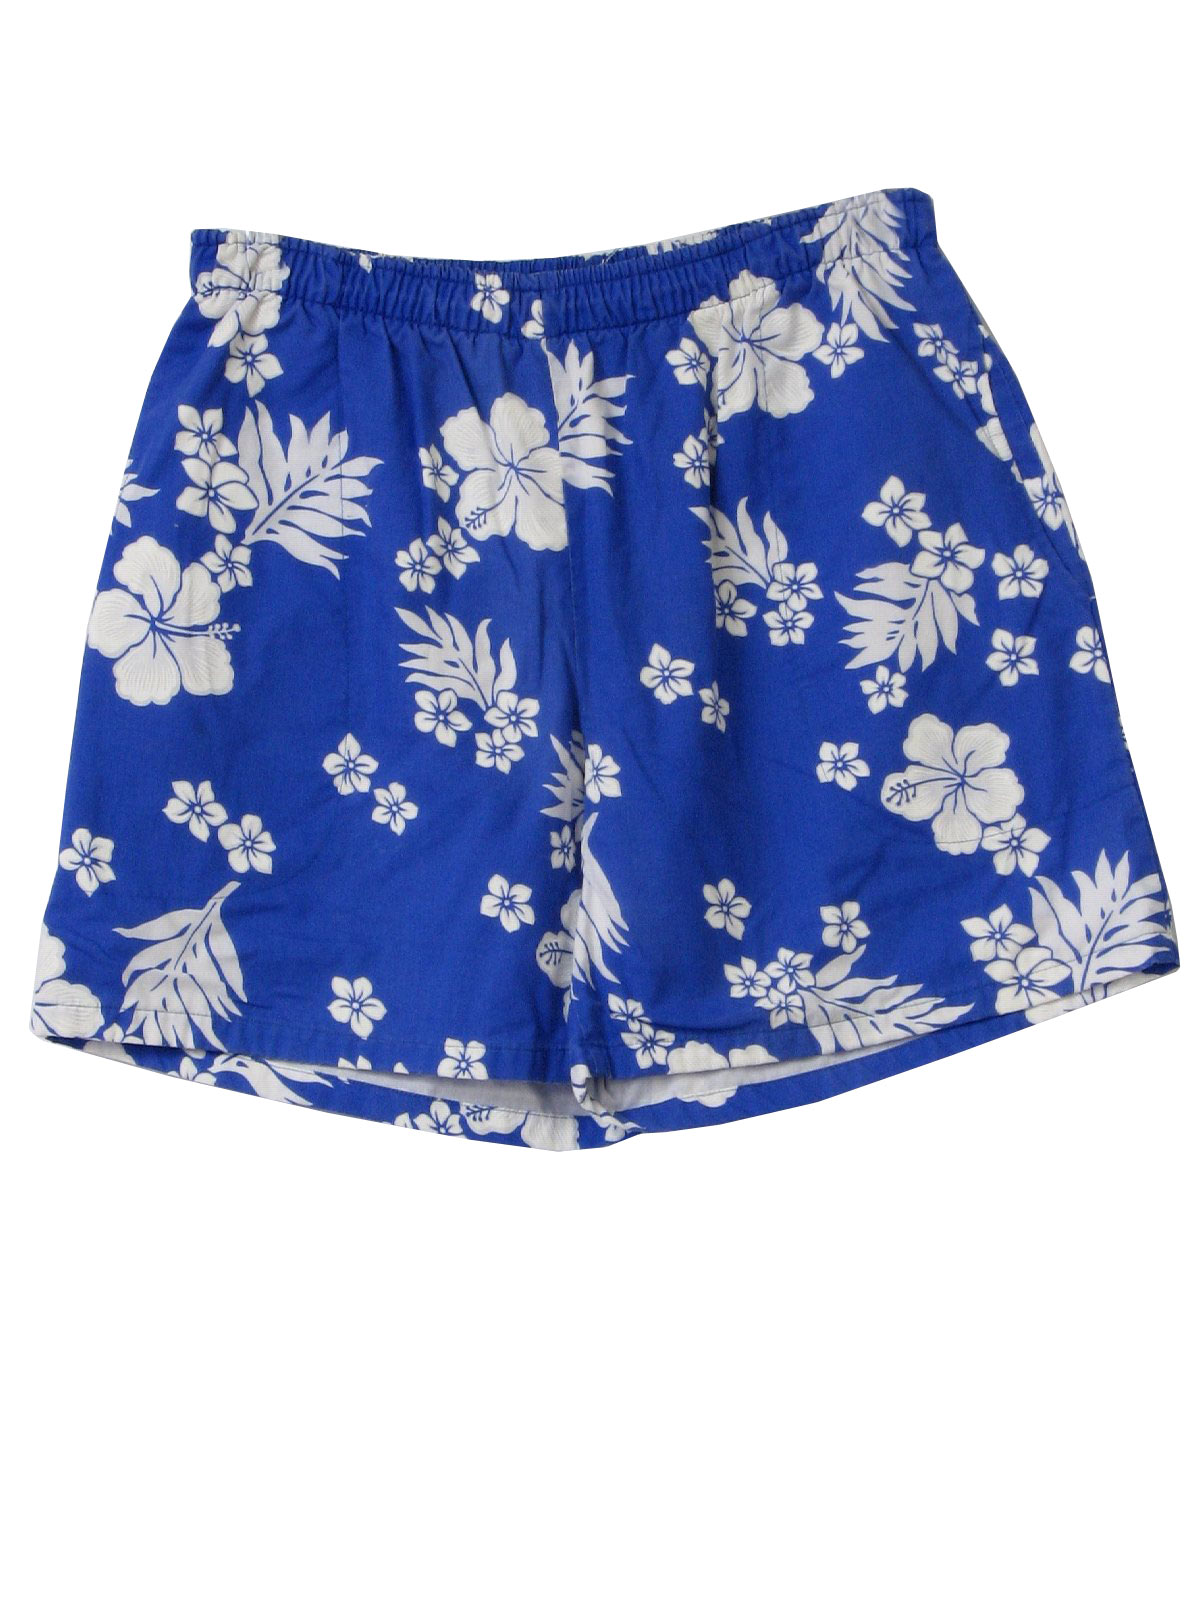 Retro 80s Shorts (Missing Label) : 80s -Missing Label- Mens blue and ...